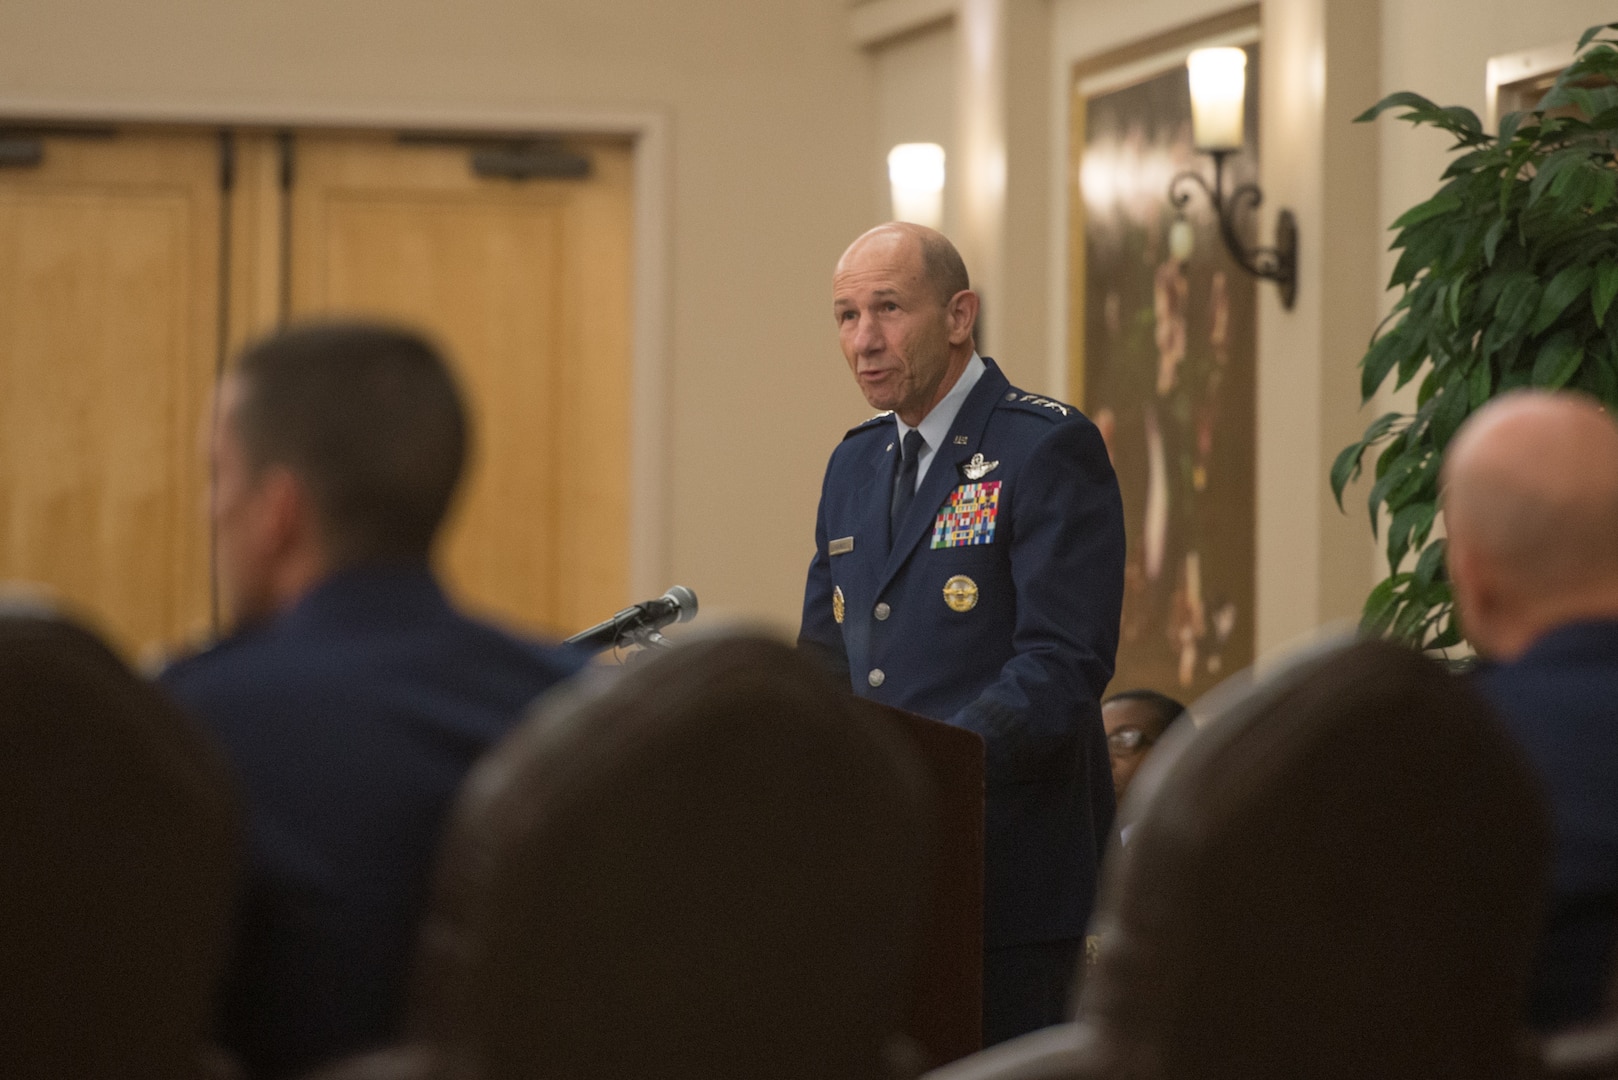 Gen. Mike Holmes, commander of Air Combat Command, addresses attendees during a command transfer and change of command ceremony at Joint Base San Antonio-Lackland, Texas, July 17, 2018. The command transfer realigned the 24th Air Force cyber operations under ACC alongside 25th AF intelligence, surveillance and reconnaissance missions; all to “drive faster decisions as we fight,” said Secretary of the Air Force Heather Wilson, in a June 7 statement. (U.S. Air Force photo by Andrew C. Patterson)